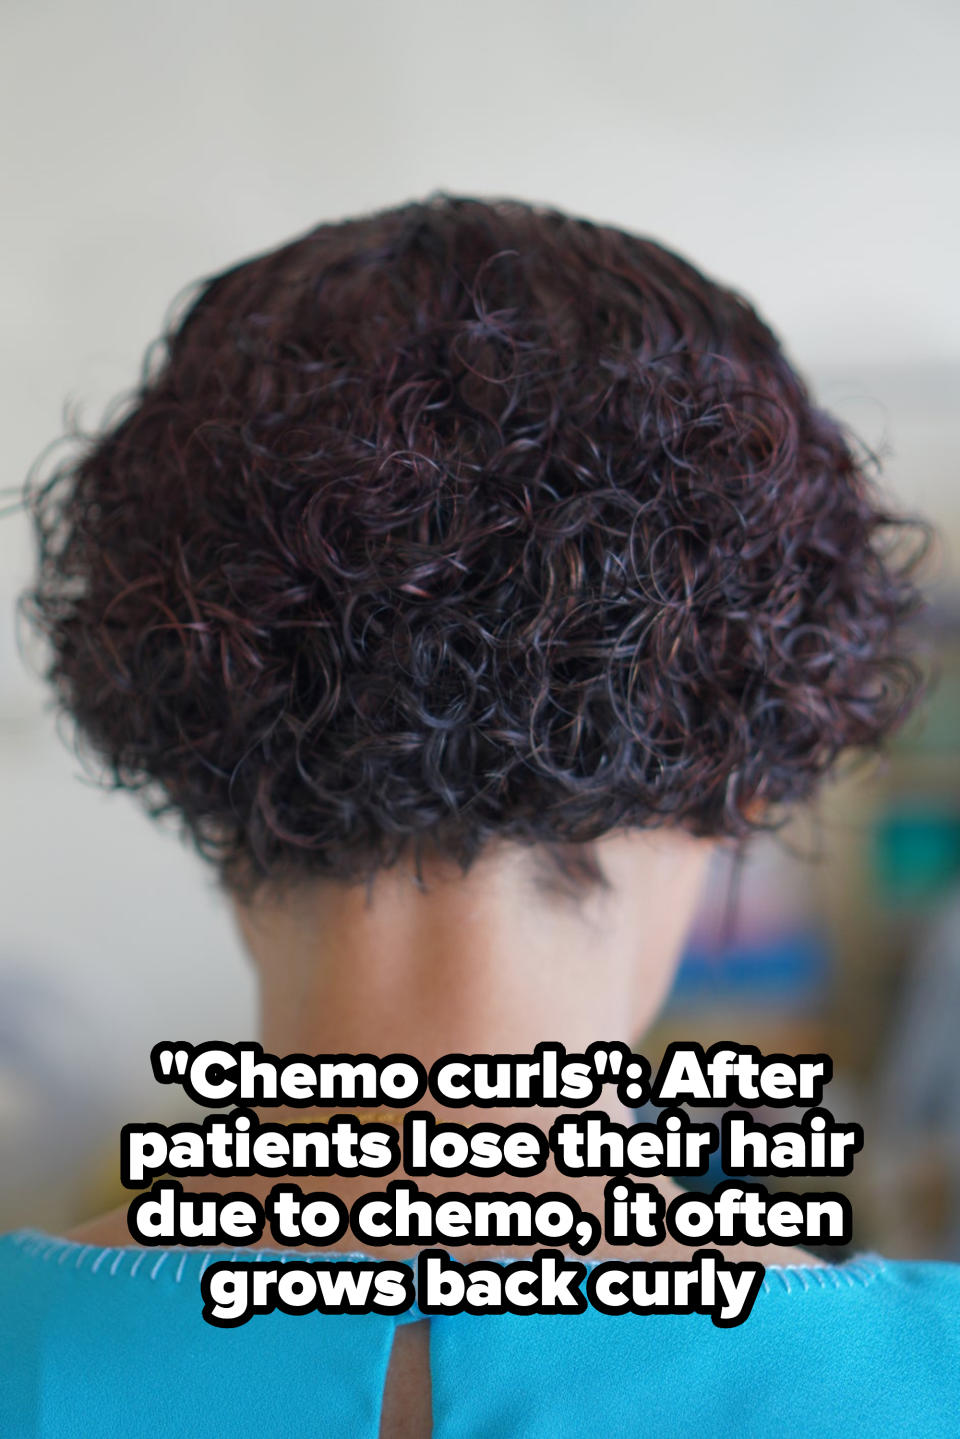 The image features the back of a person with short, curly hair wearing a top with a buttoned back. The focus is on the hairstyle